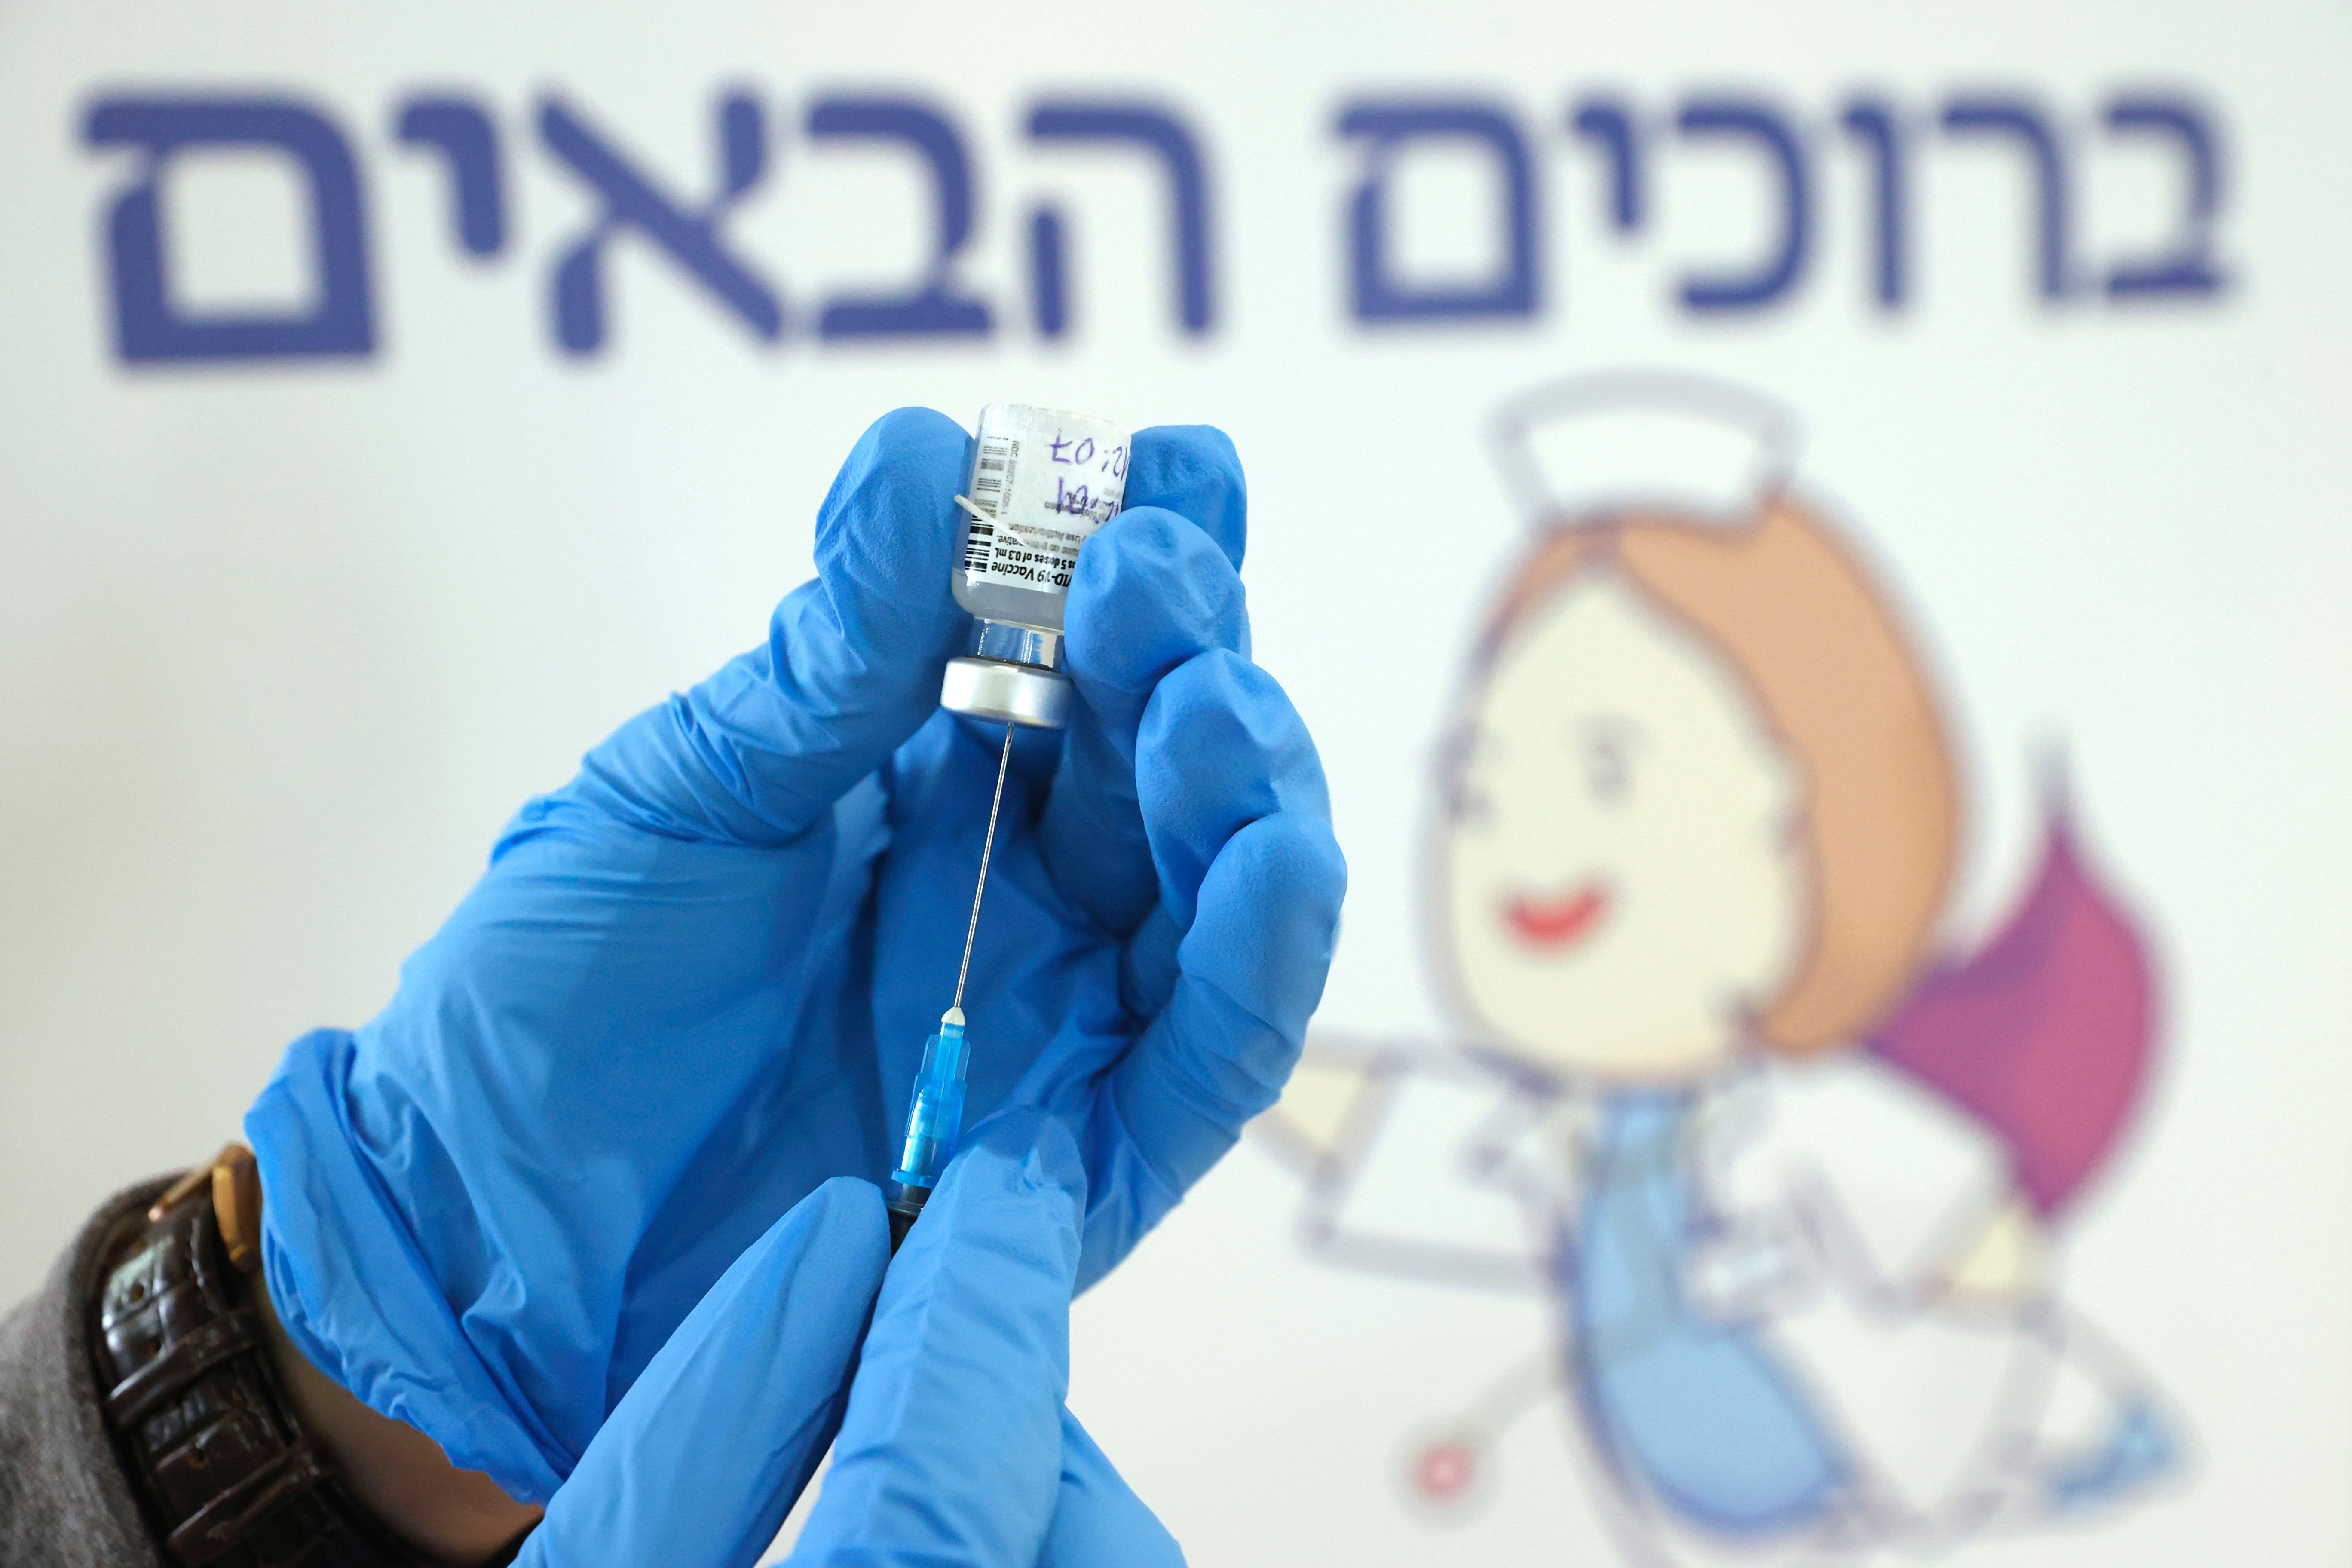 Israeli data suggests that massive vaccinations have led to serious Covid cases, CDC study finds